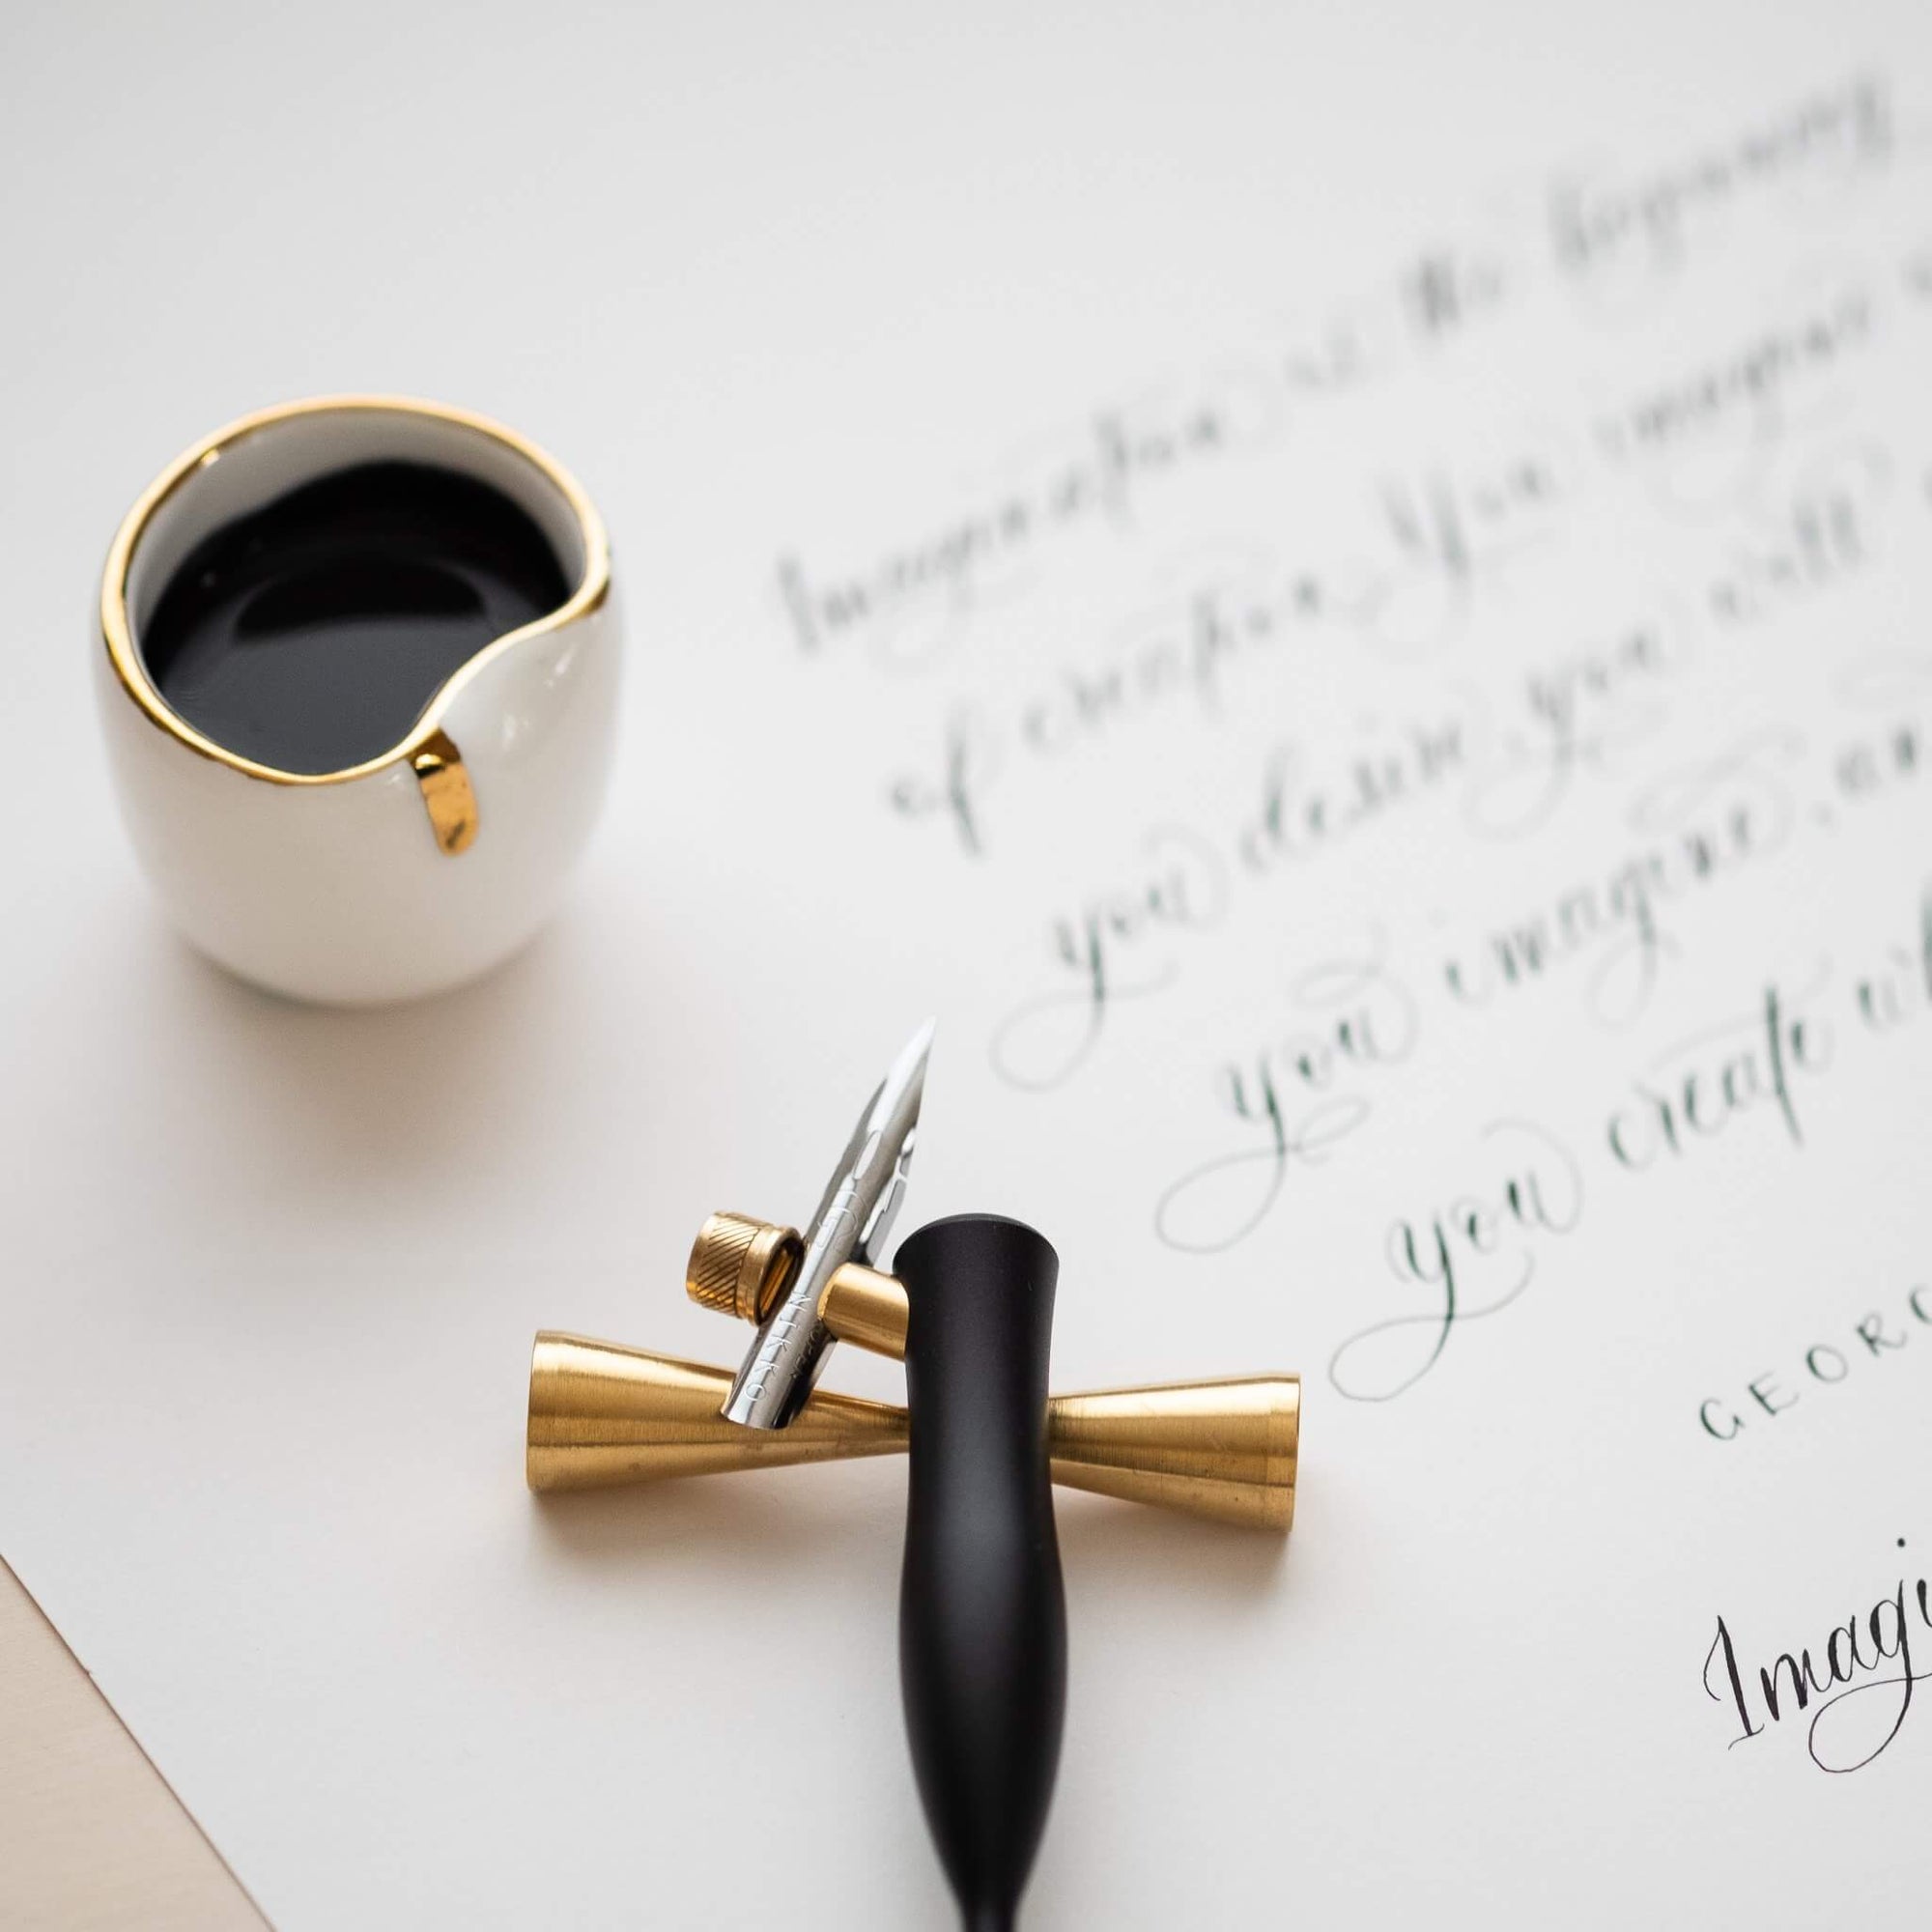 black oblique calligraphy pen on a brass pen rest resting on a sheet of modern calligraphy with an ink well